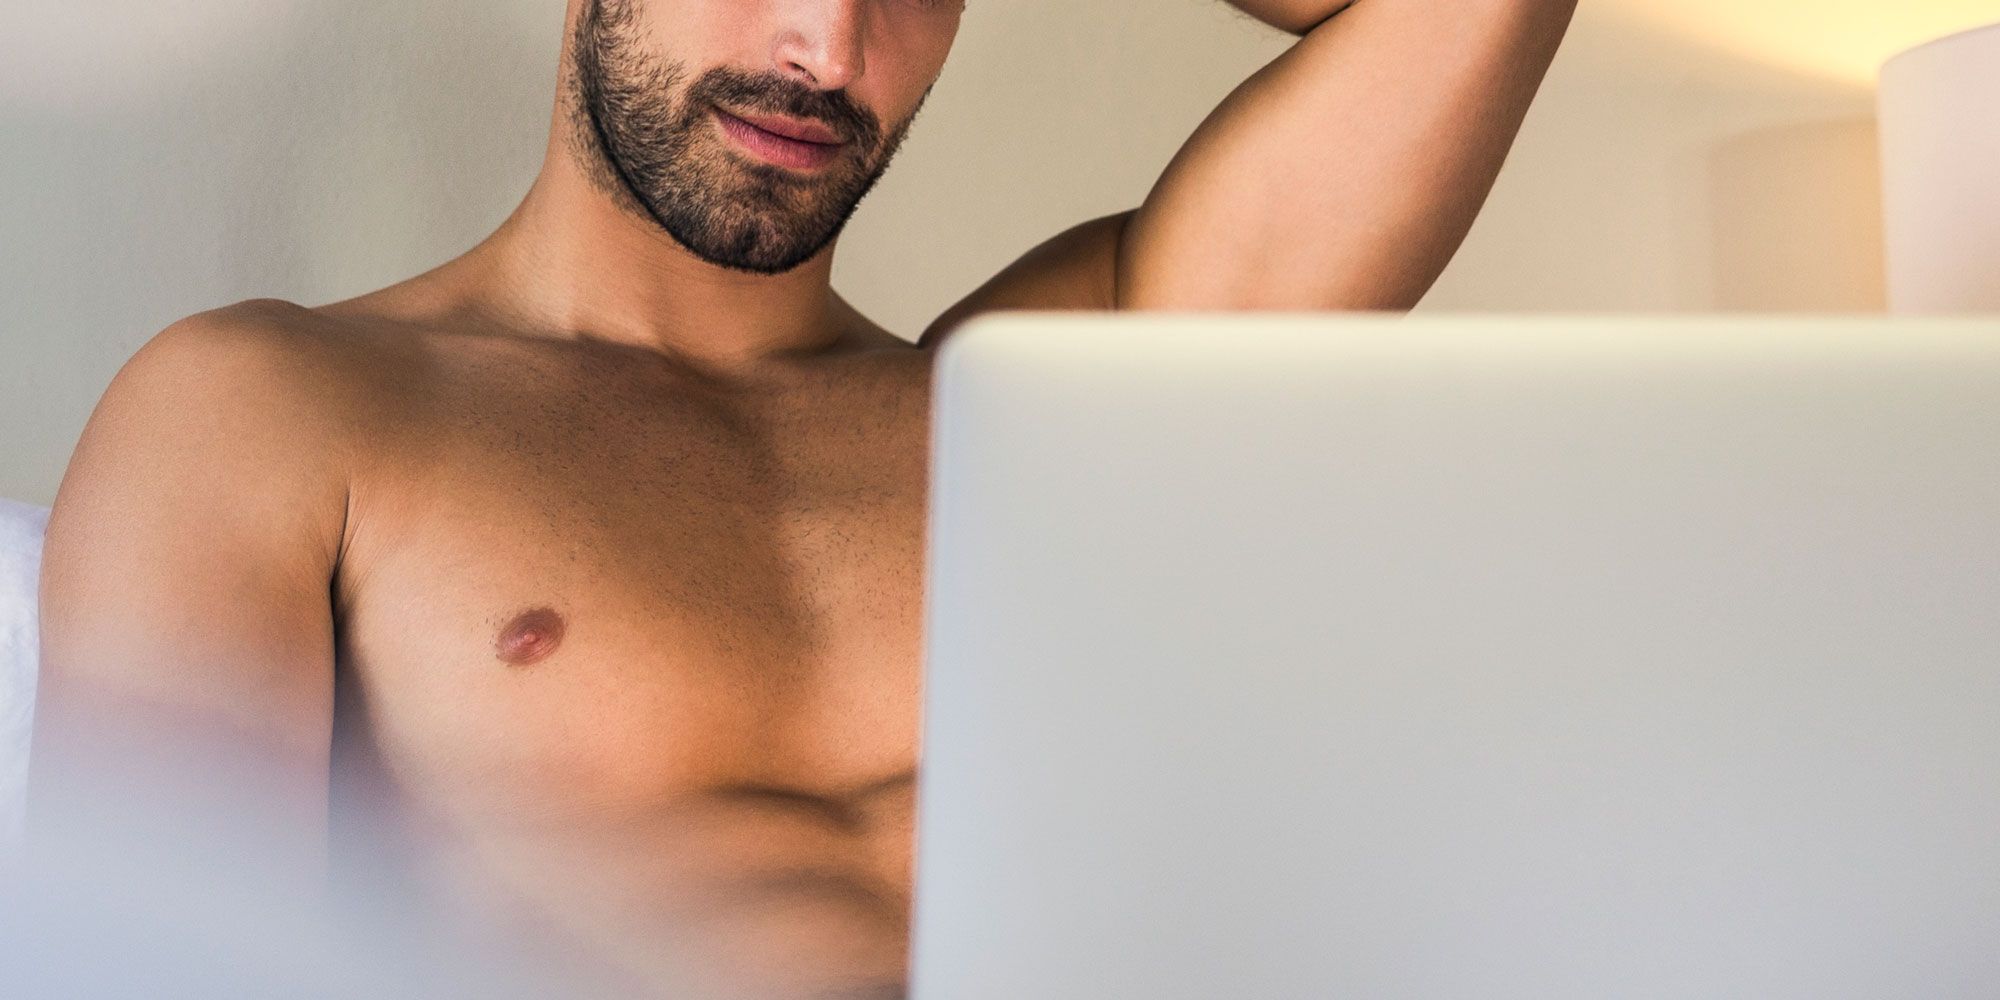 7 Guys Explain Why They Shared Their Porn Viewing History With Their Partners